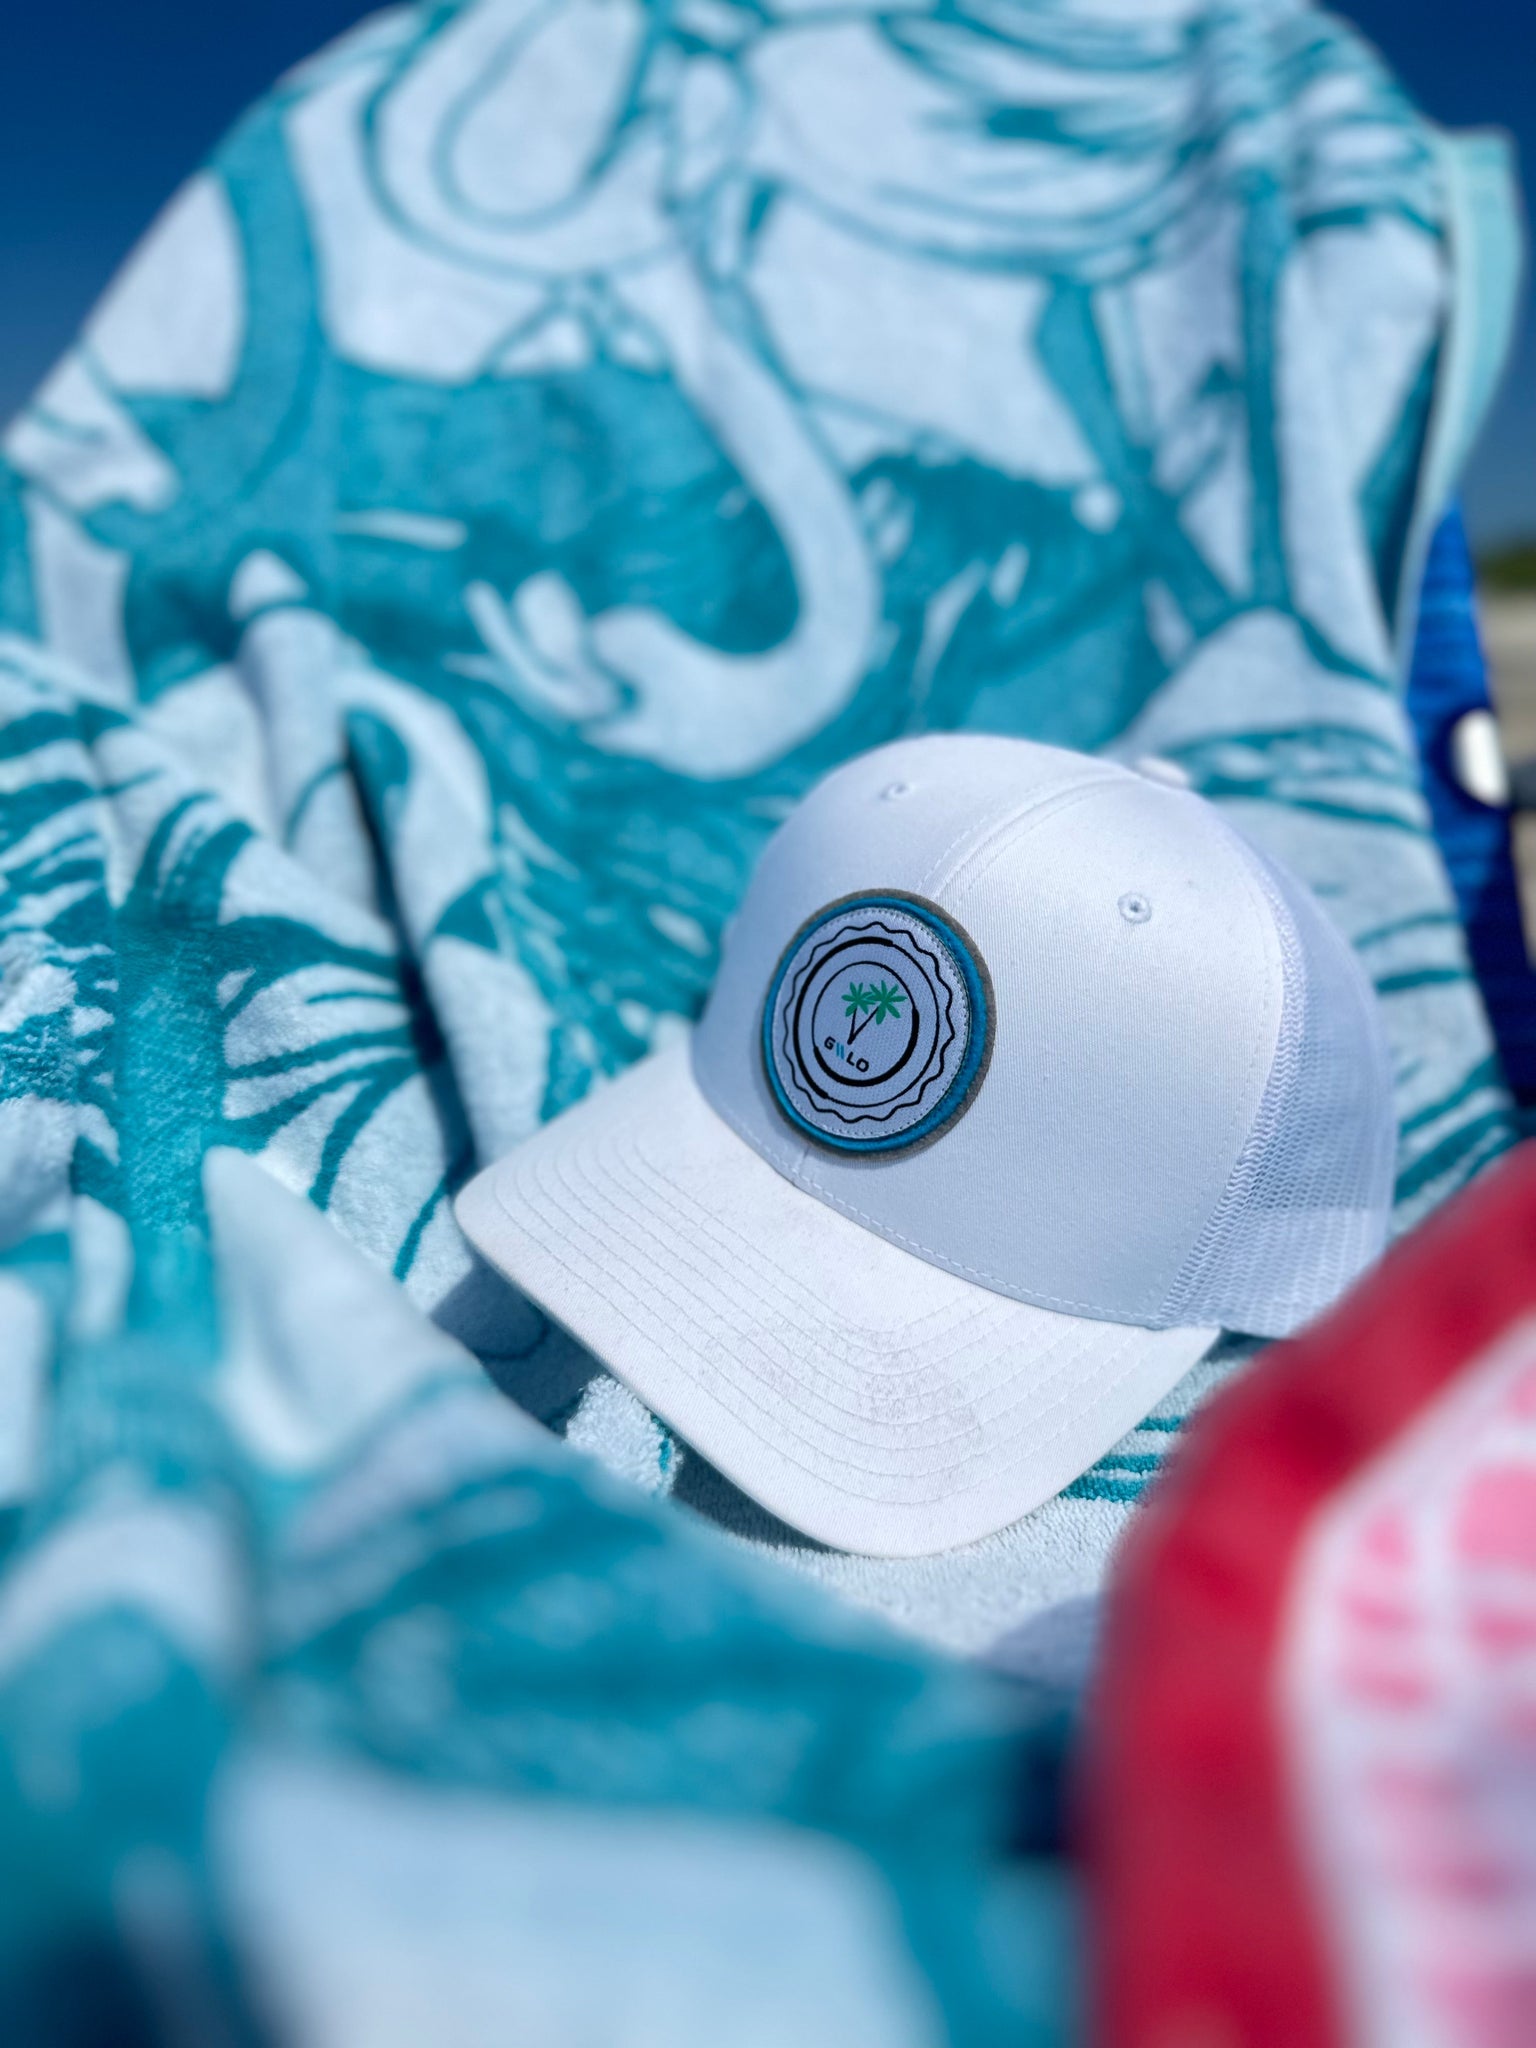 The Connection Between Golf Hats & Brand Loyalty